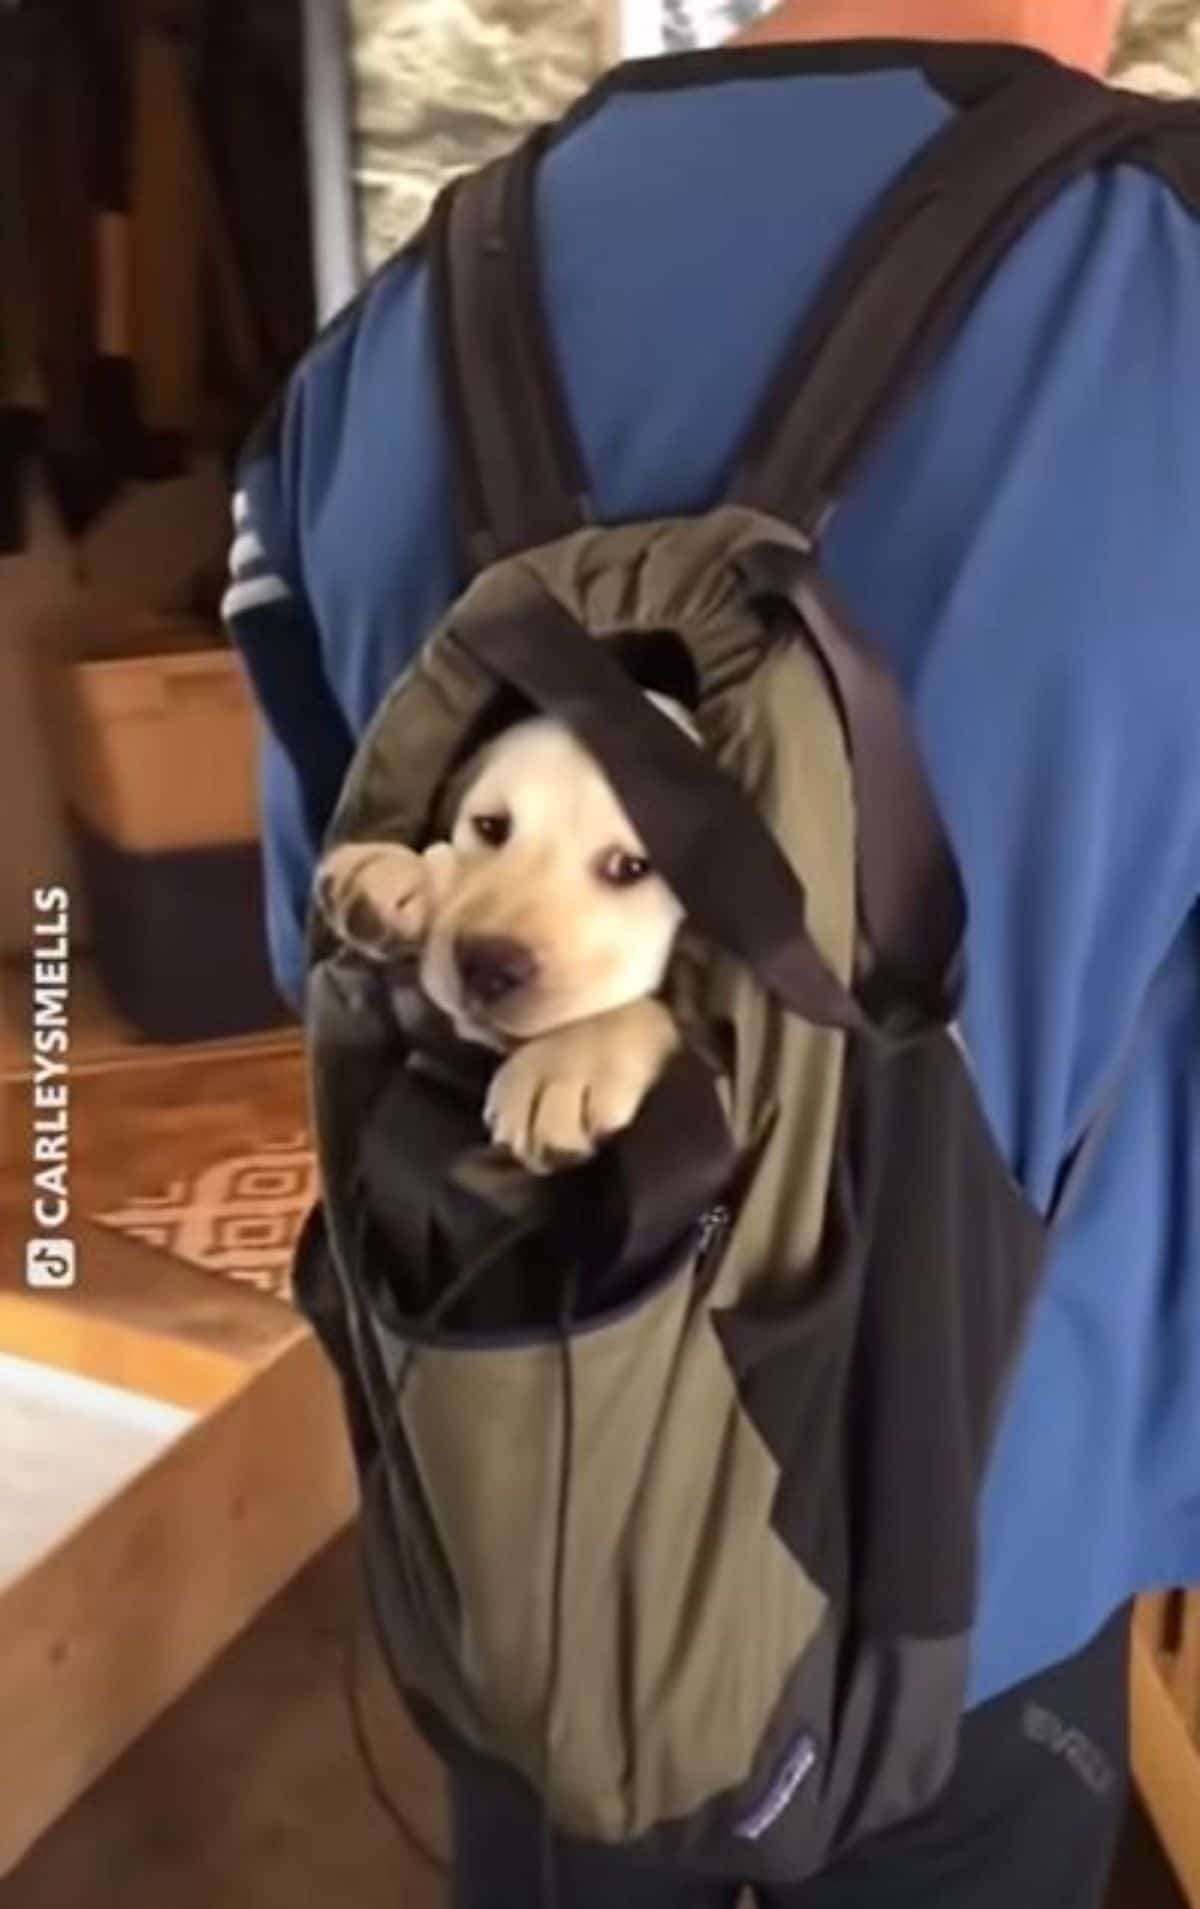 yellow labrador puppy inside a green backpack looking out and the backpack is being worn by someone wearing blue